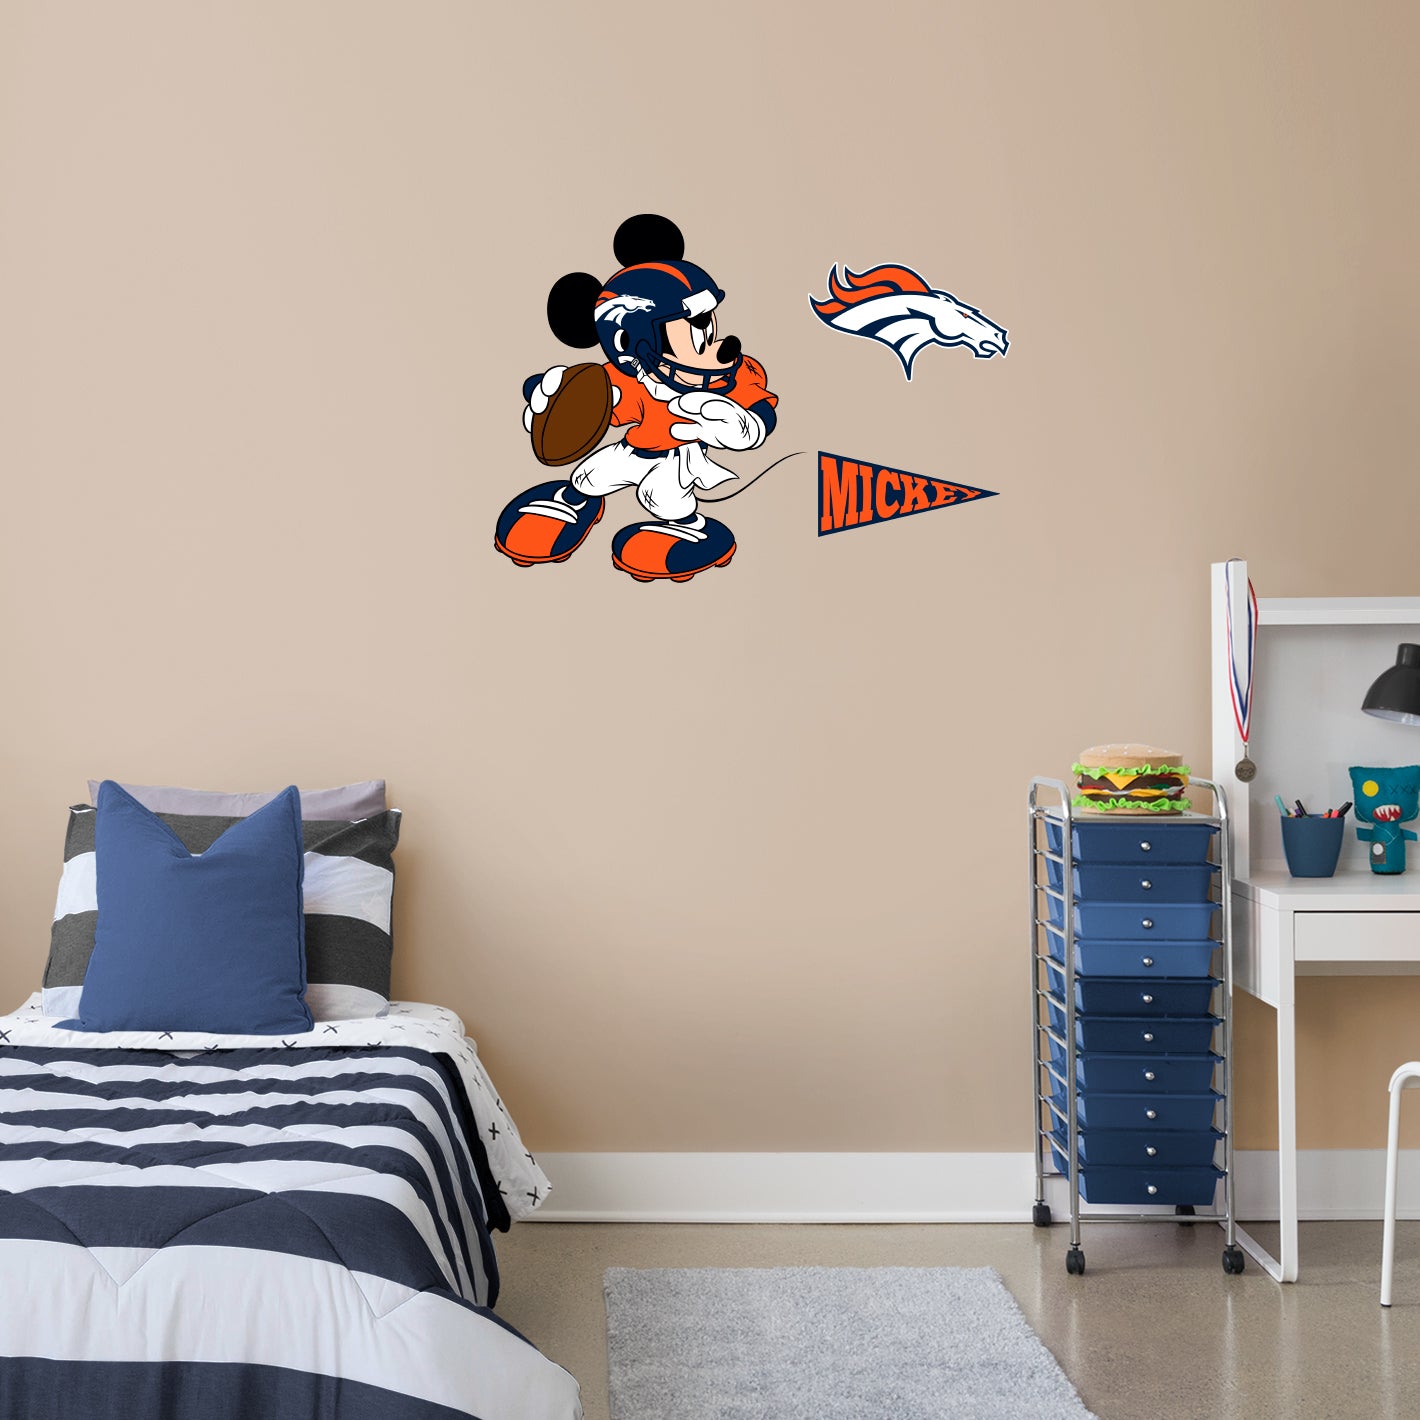 Denver Broncos: Mickey Mouse - Officially Licensed NFL Removable Adhesive Decal